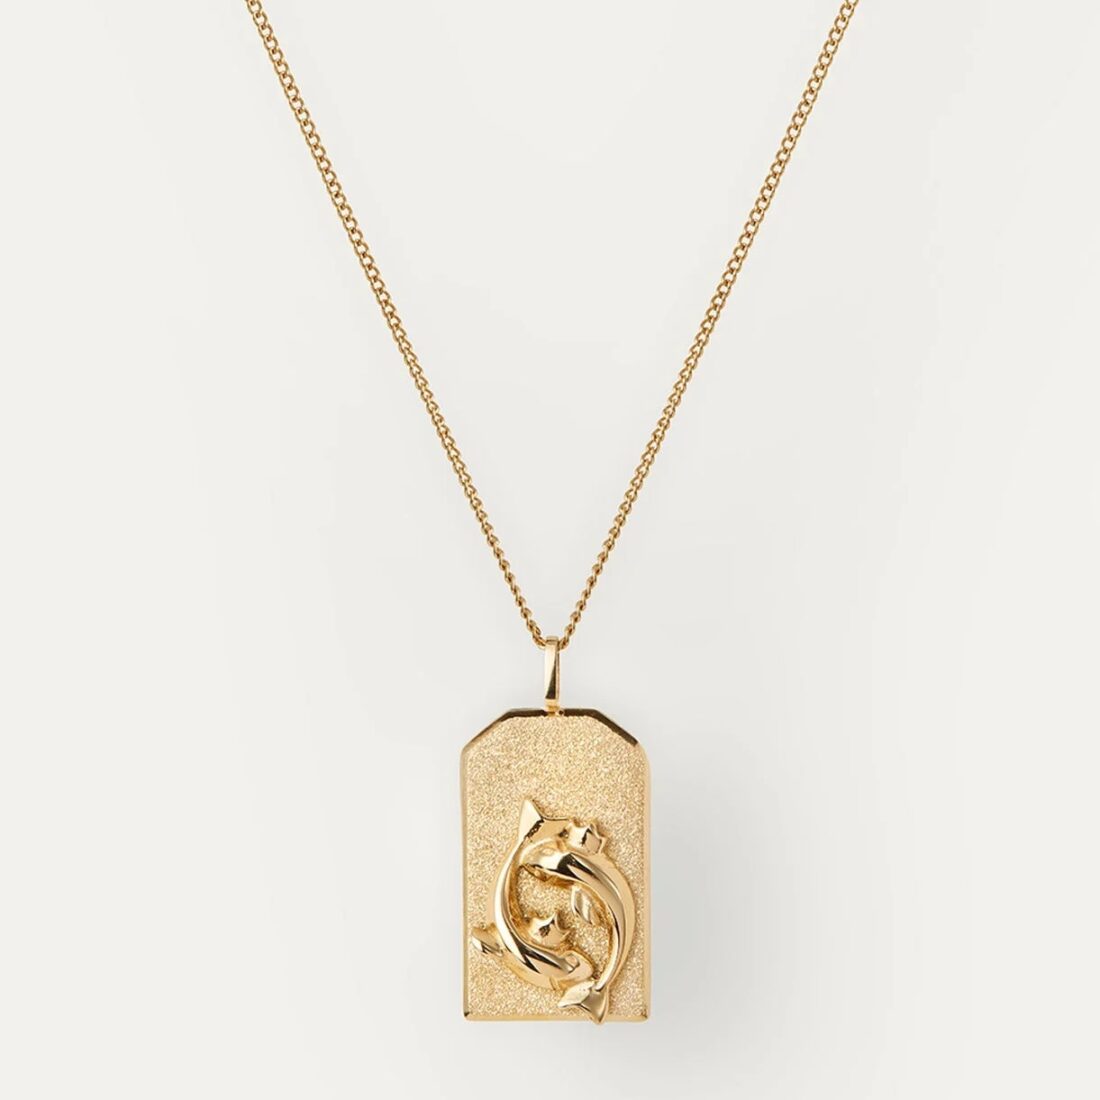 A necklace with gold fish